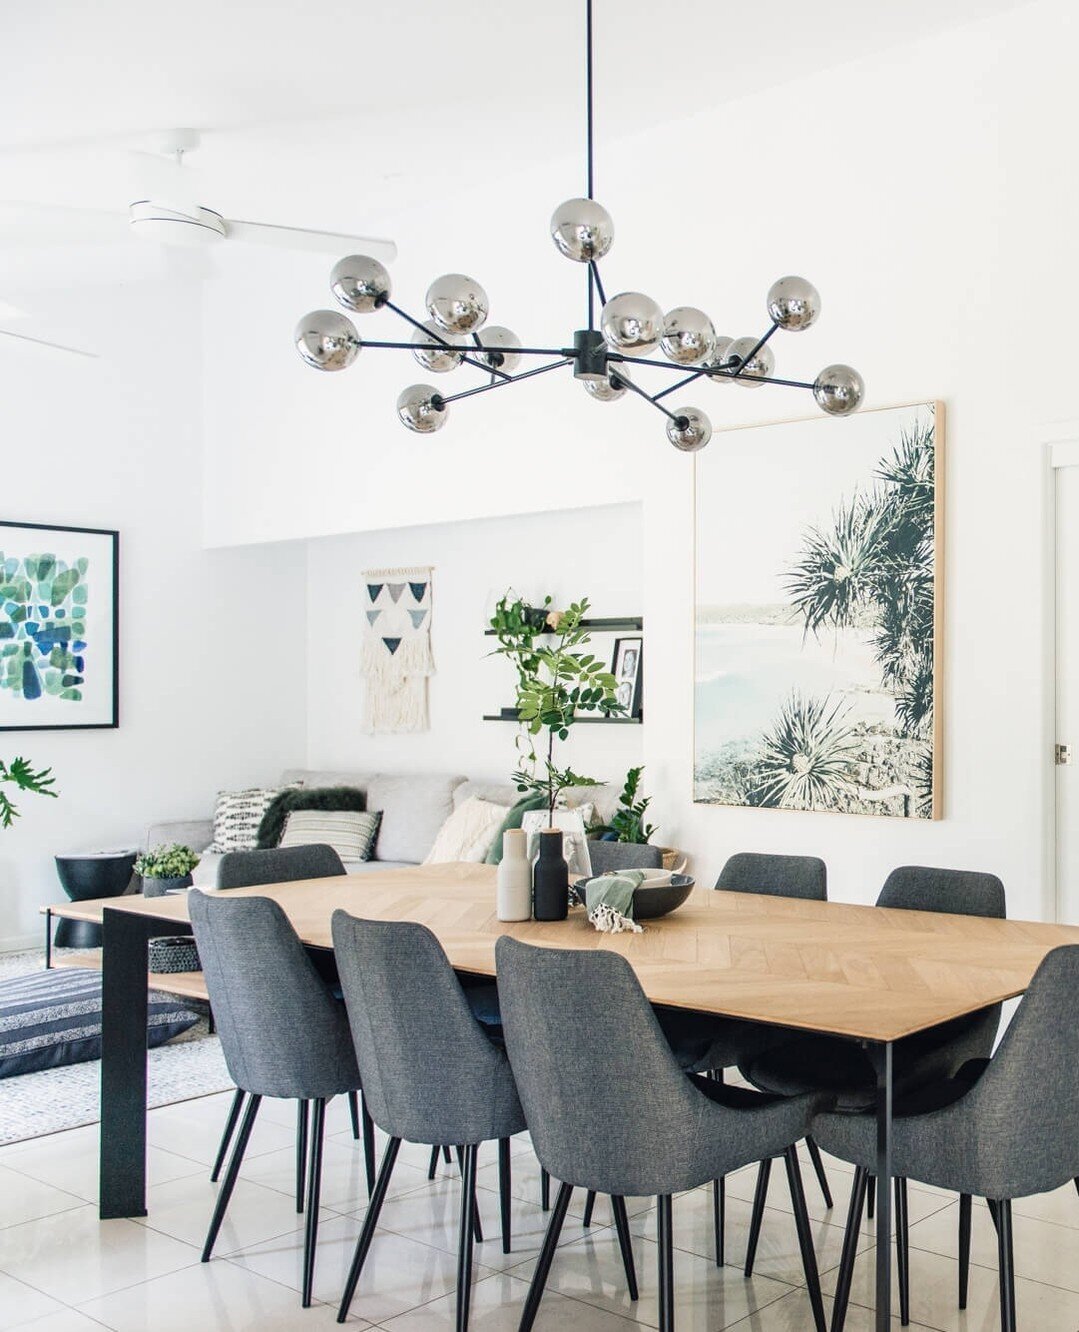 DINING 🍲⁠
⁠
Dining Areas are underestimated as the hub of any home. Instead of having ghost chairs (and if you have the space) go for the larger table, so everyone has a seat, and huge family dinners and celebrations can be enjoyed by all 🙌🏼⁠
⁠
TI